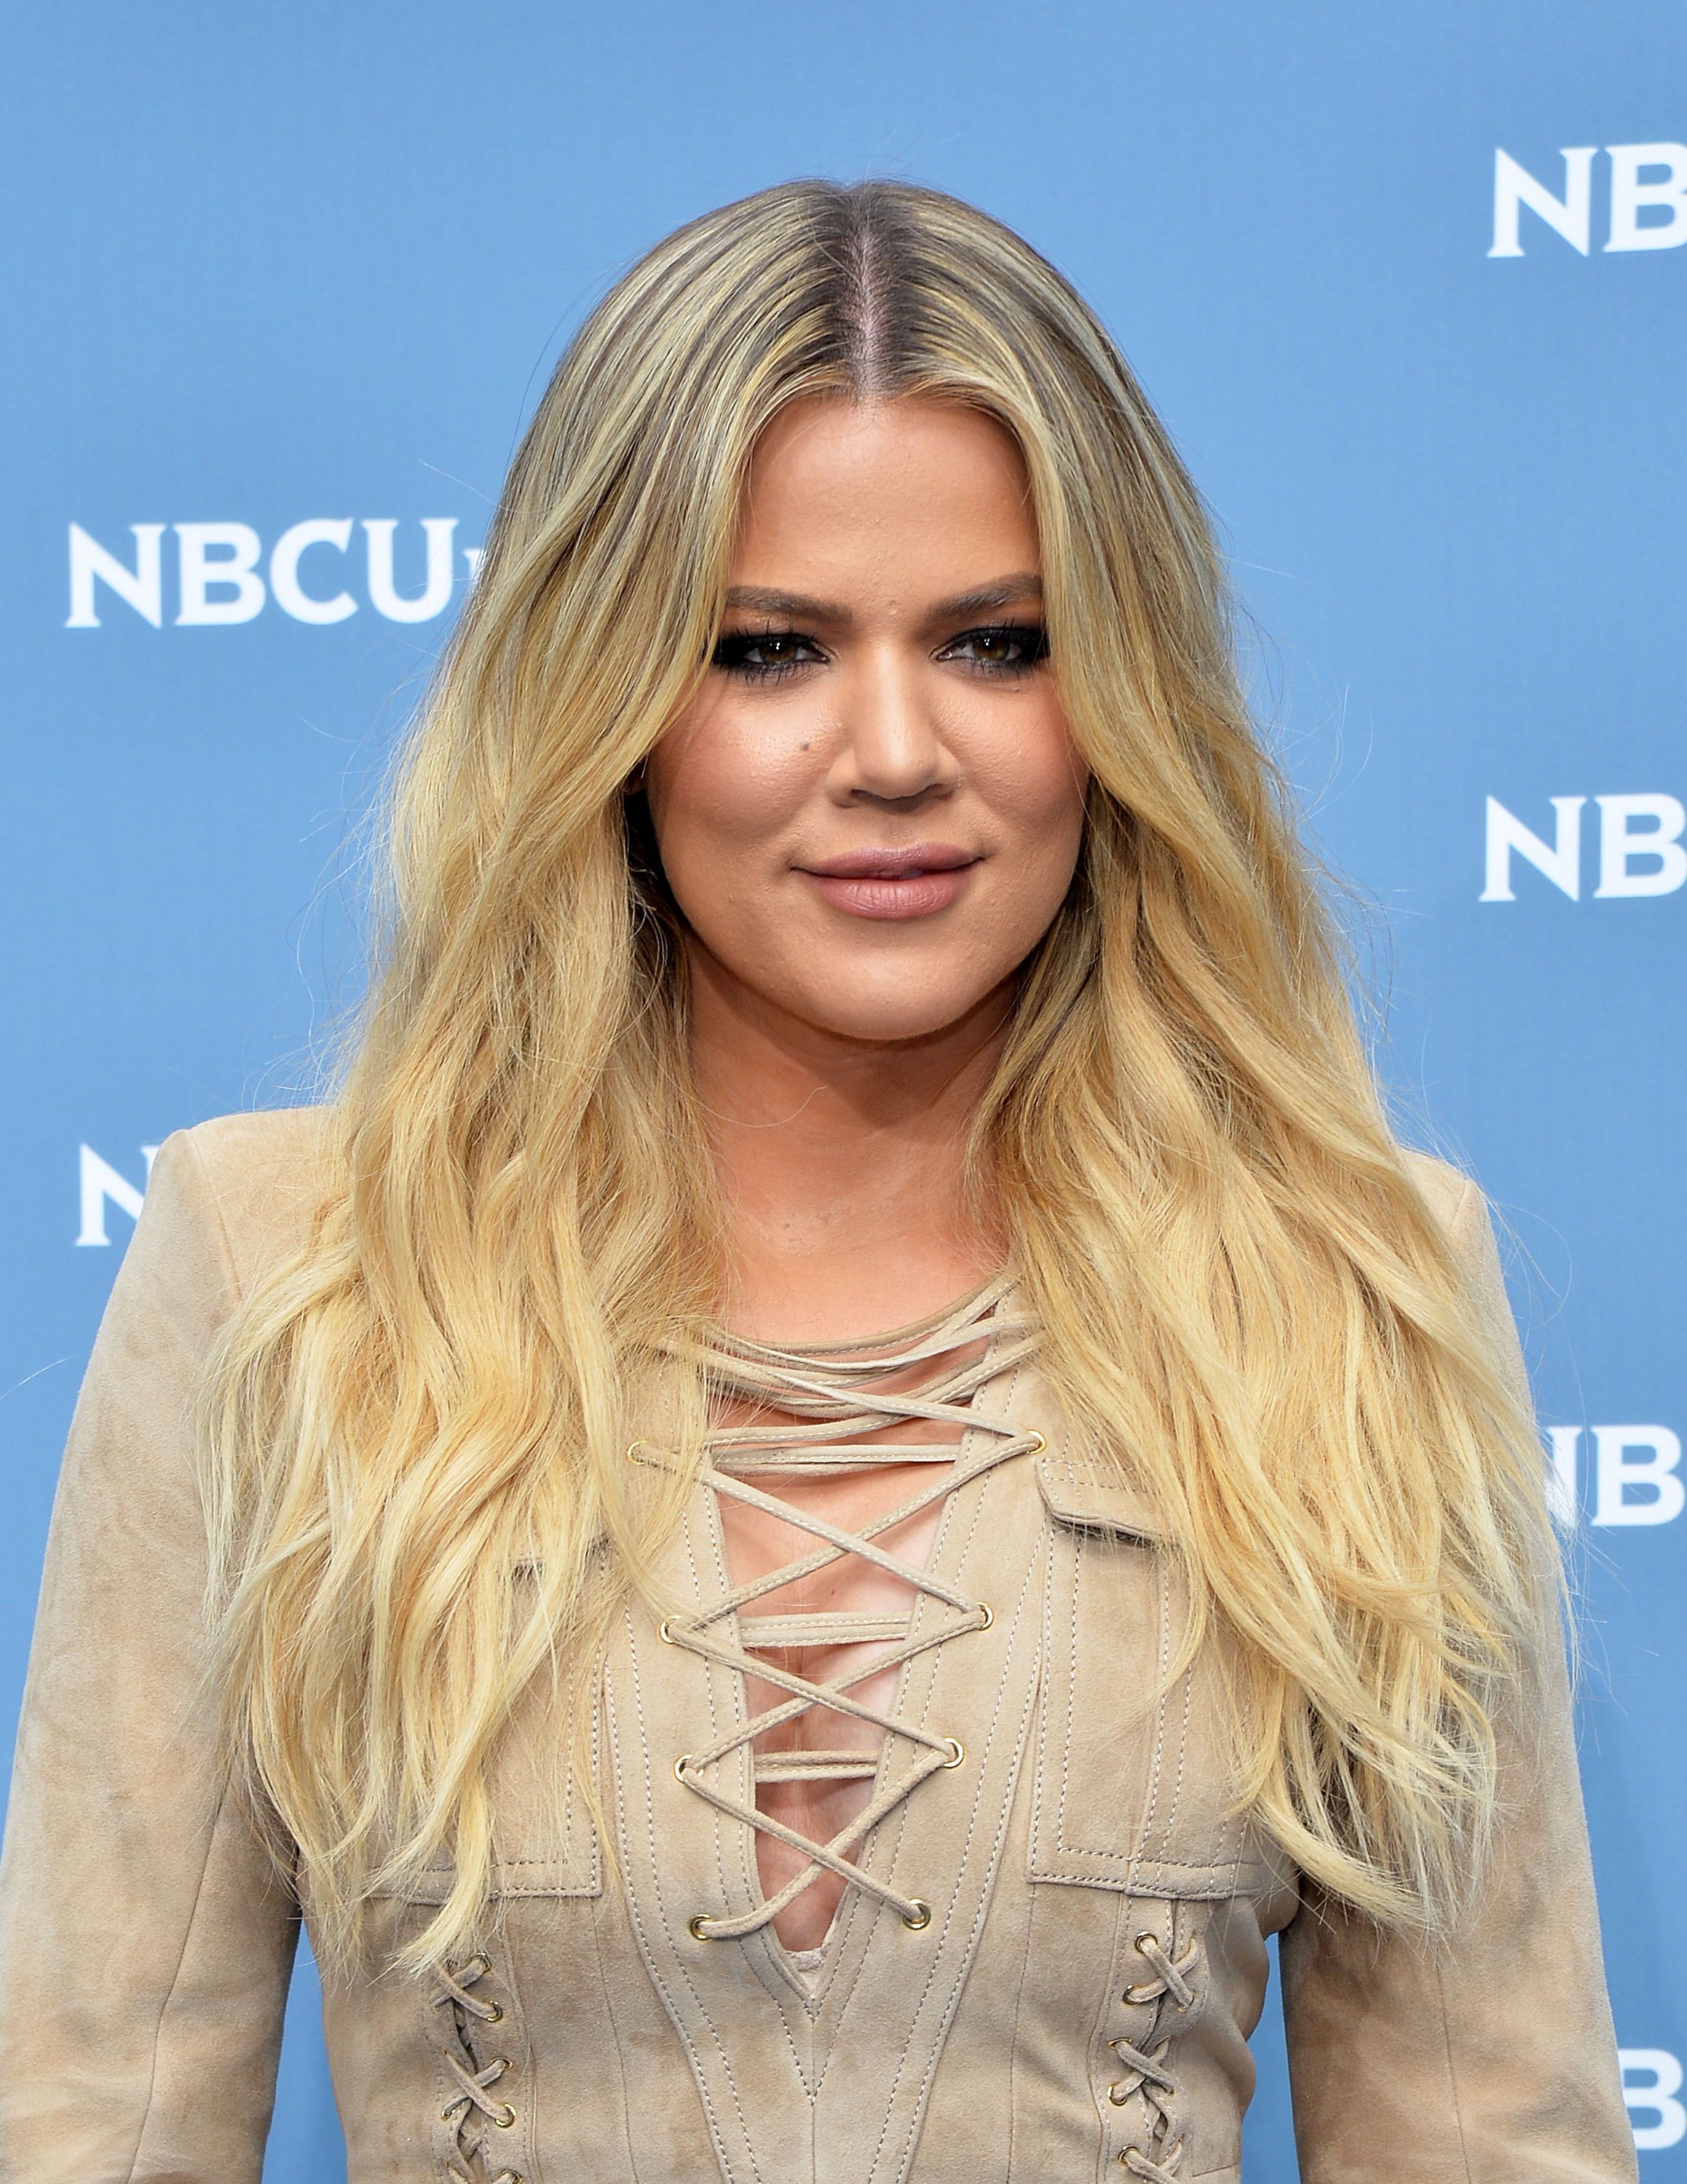 Khloé Kardashian at the NBCUniversal Upfront Presentation on May 16, 2016, in New York | Photo: Slaven Vlasic/Getty Images